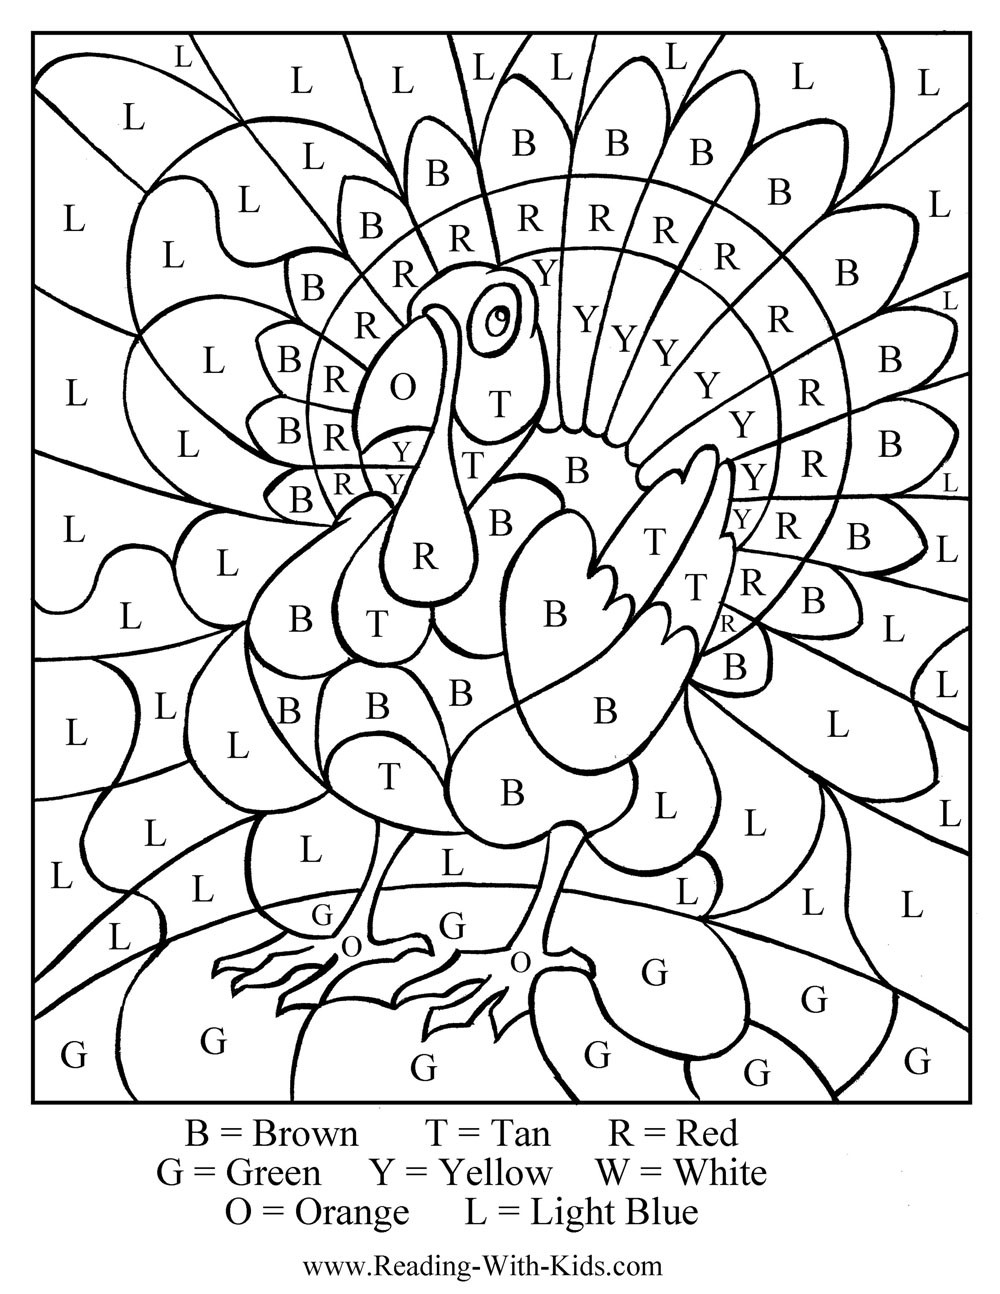 Thanksgiving Coloring Pages Kids
 Free Thanksgiving Coloring Pages & Games Printables